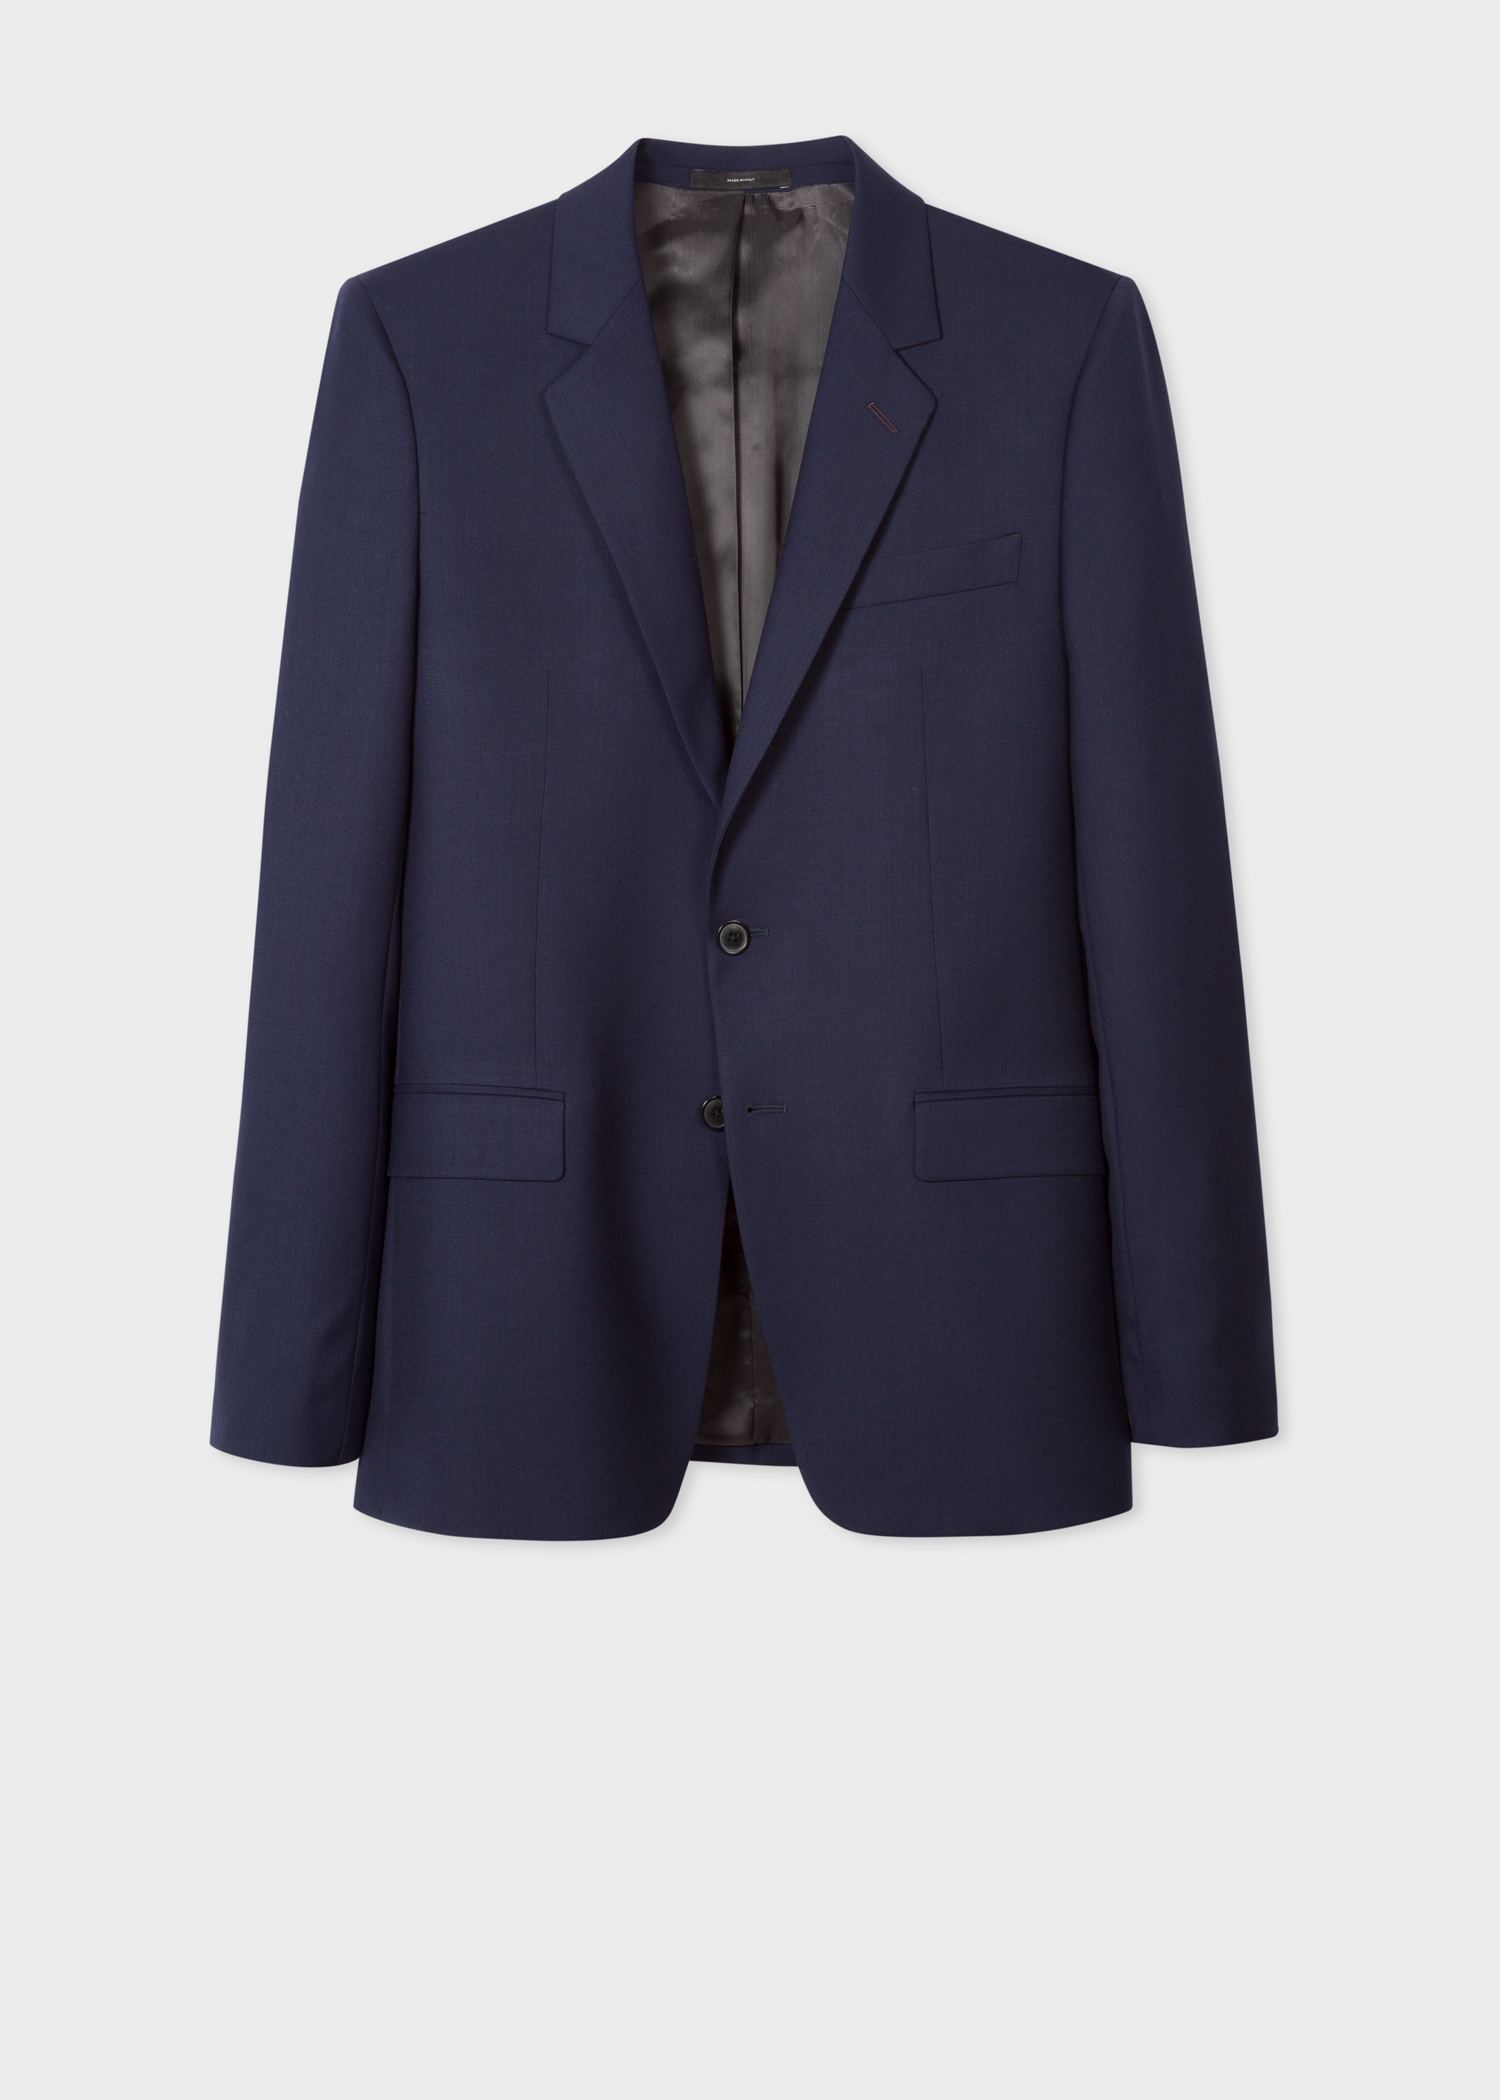 Blazer view - The Piccadilly - Men's Tailored-Fit Navy Blue Wool Suit 'A Suit To Travel In'